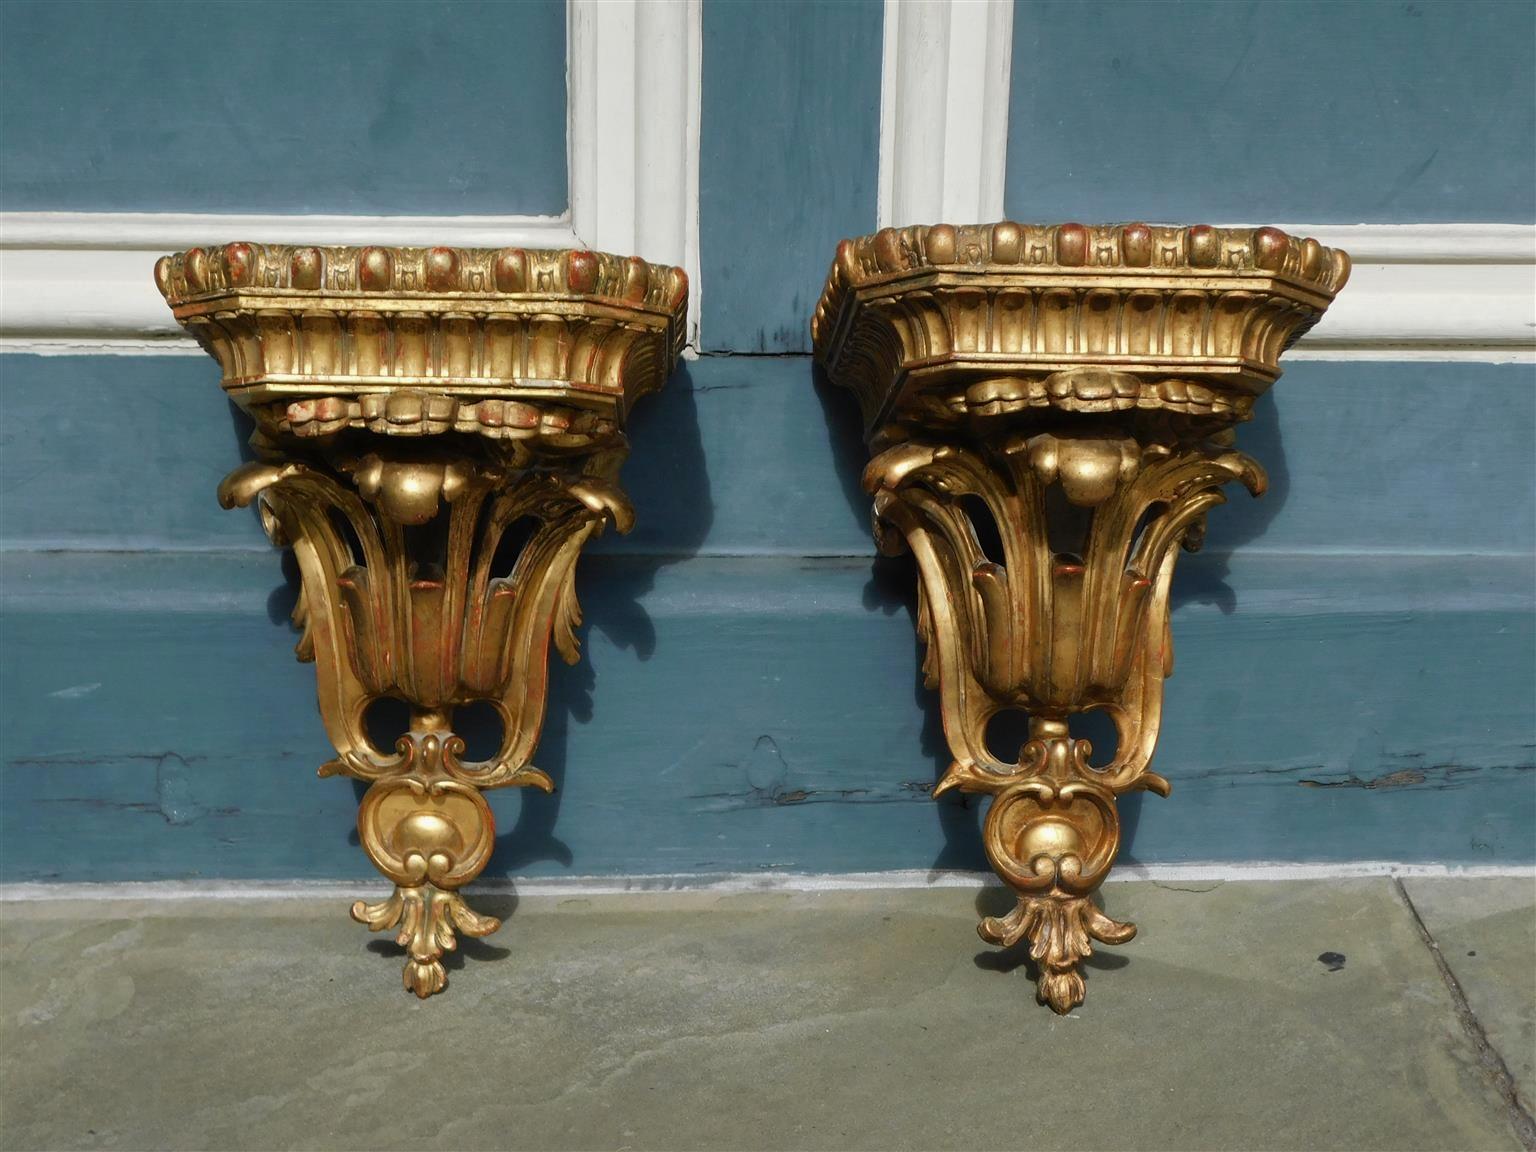 Pair of French gilt wood and gesso decorative carved foliage and gadrooned hanging wall brackets, Early 19th century.